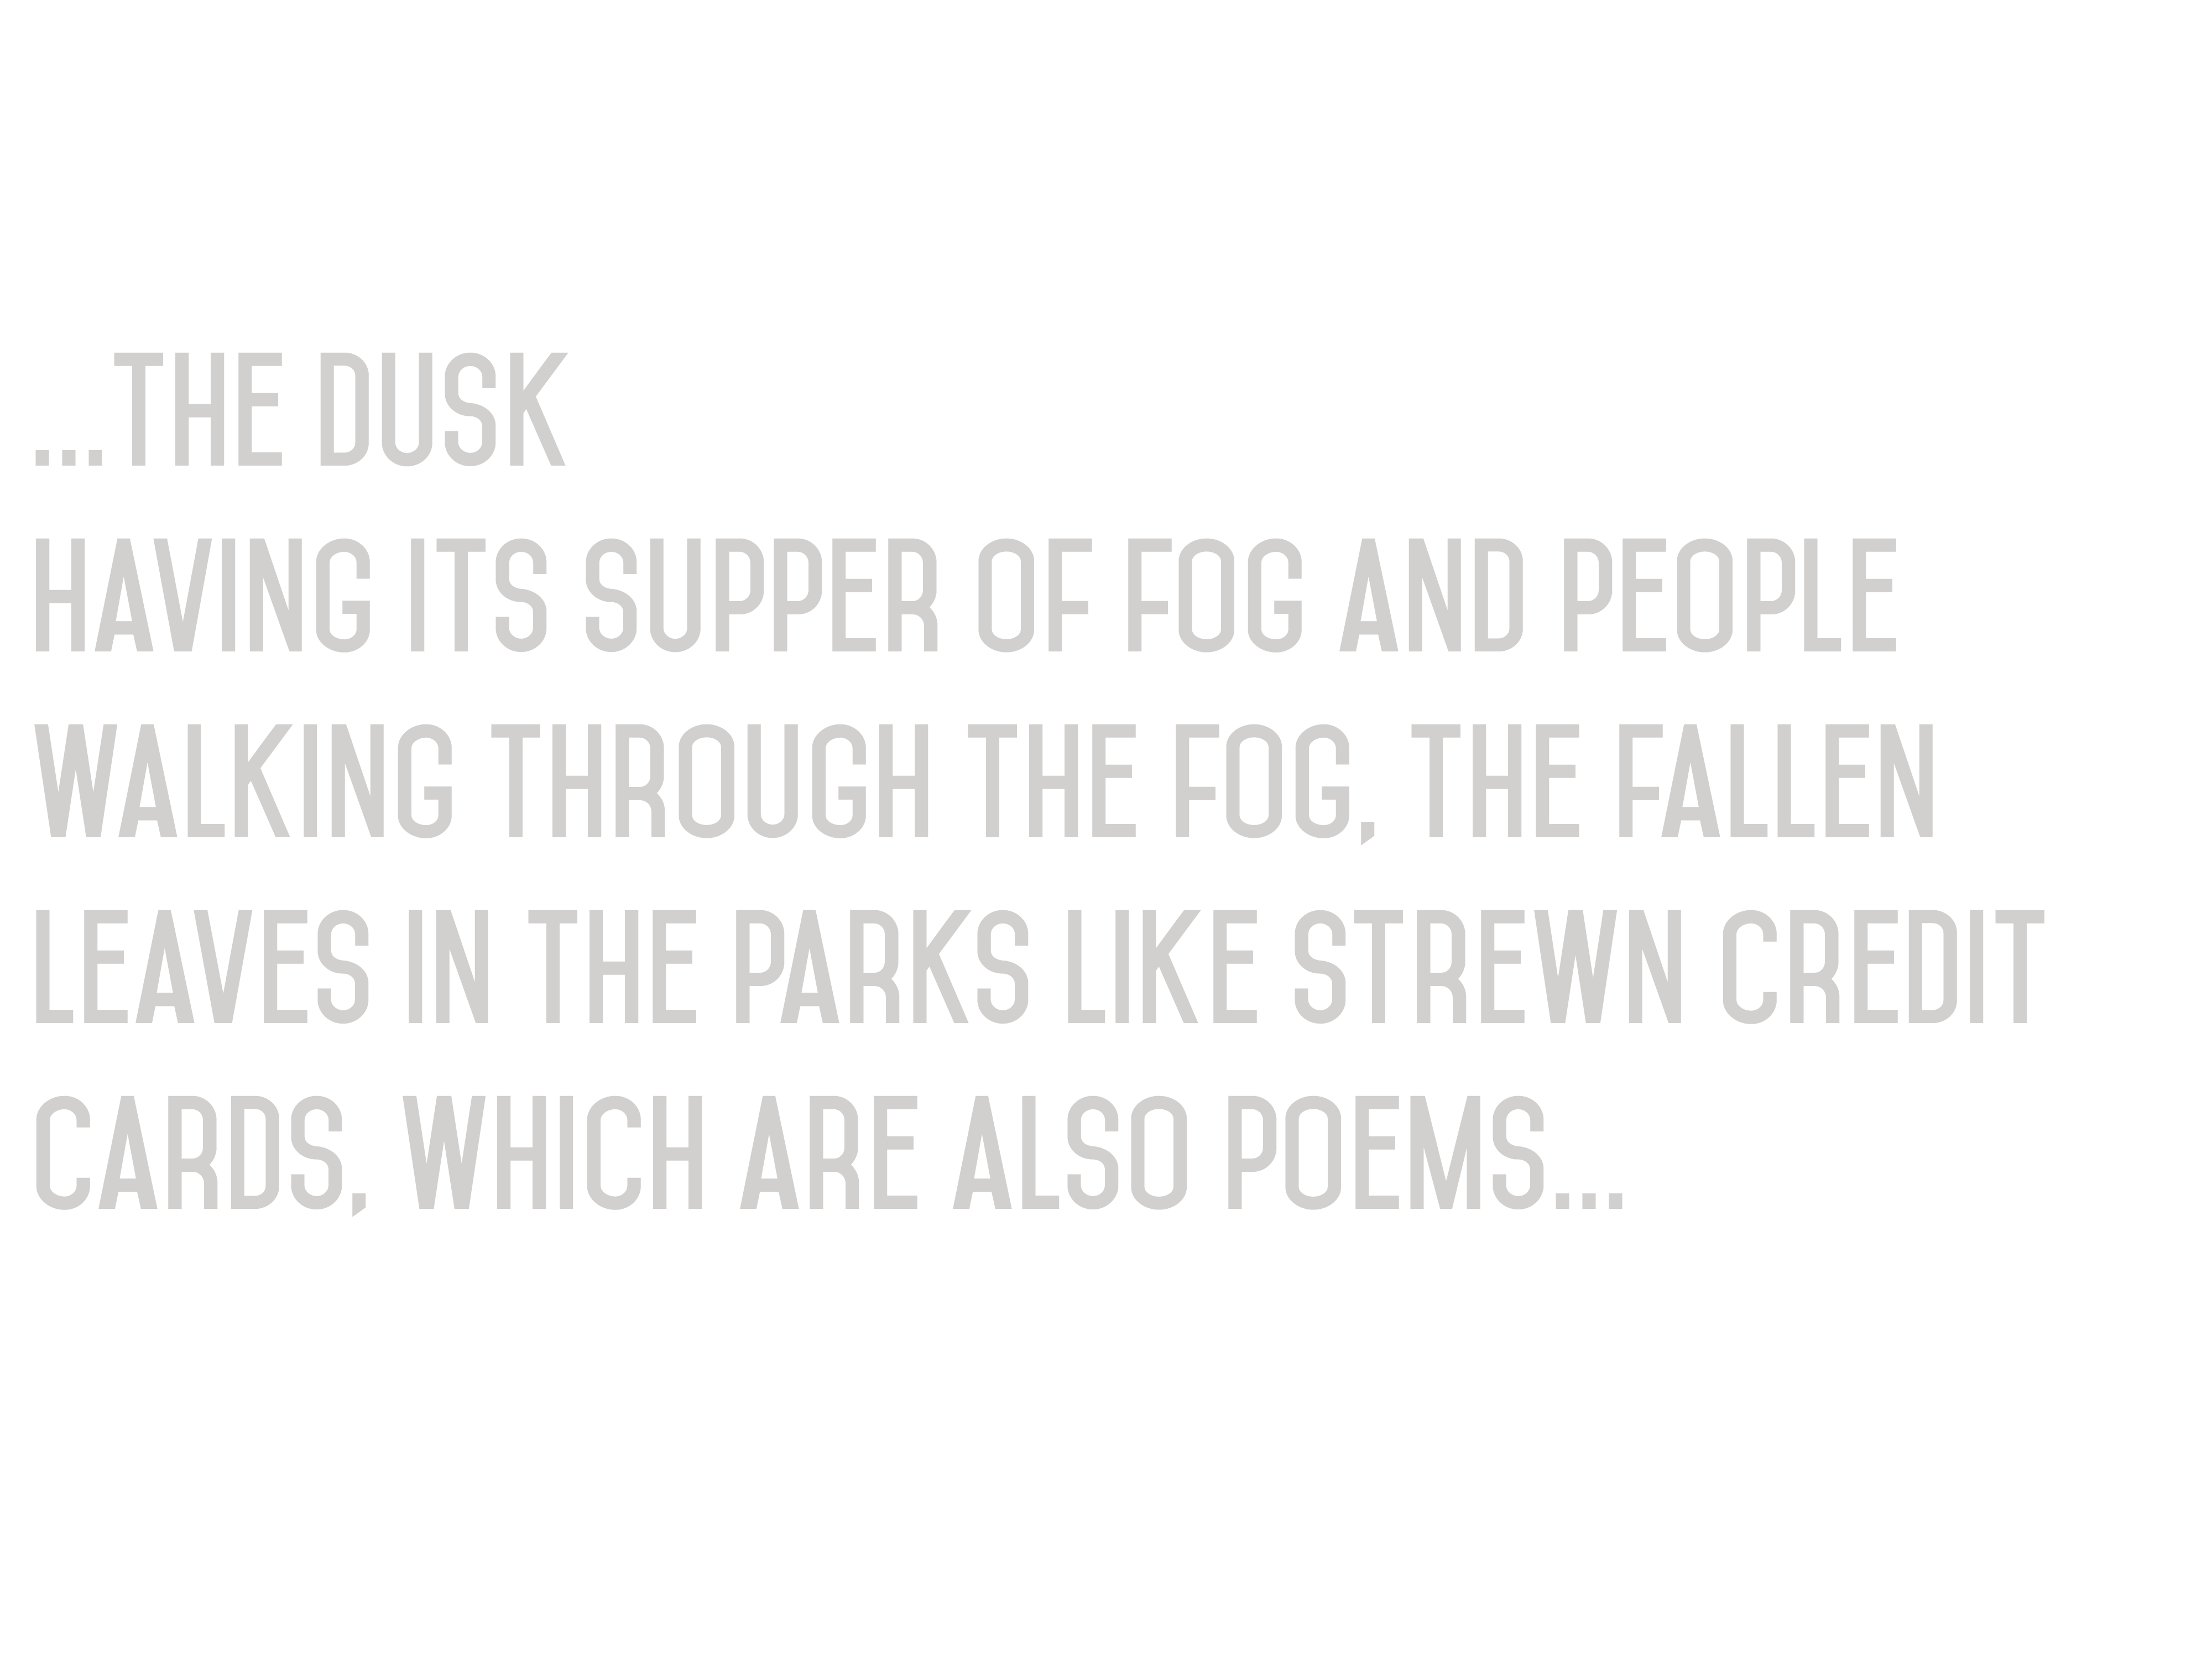 Rick Barot Quote from "The Poem is a Letter Opener" - The Dusk having its supper of fog and people walking through the fog, the fallen leaves in the parks like strewn credit cards, which are also poems...